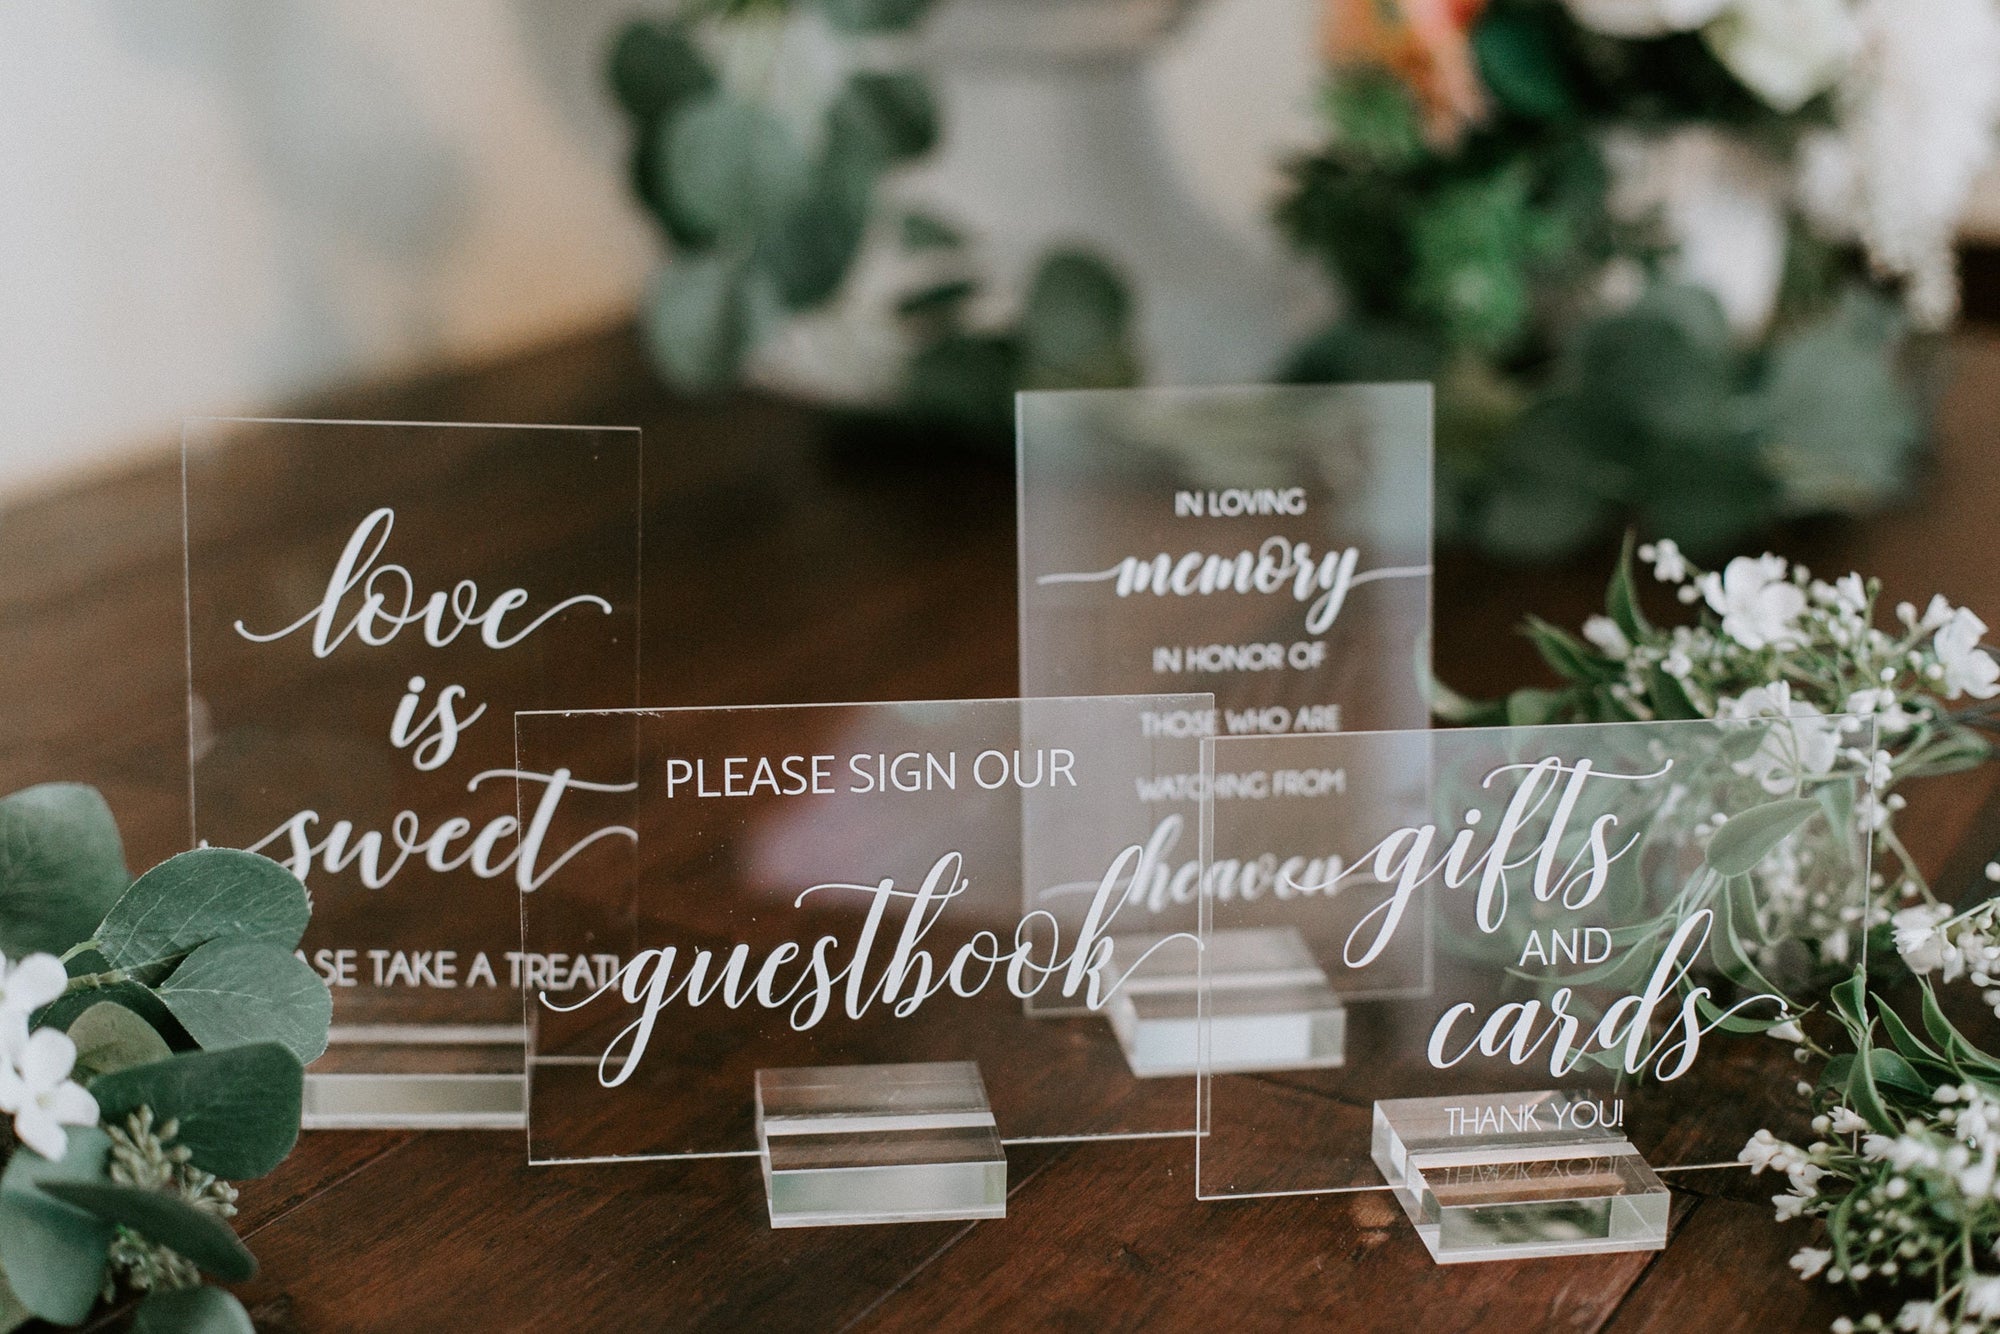 Set of 4x6 OR 5x7  Acrylic Wedding Signs, Gifts and Cards In Loving Memory Please Take One Favors Clear Glass Modern Calligraphy Sign, HONLD